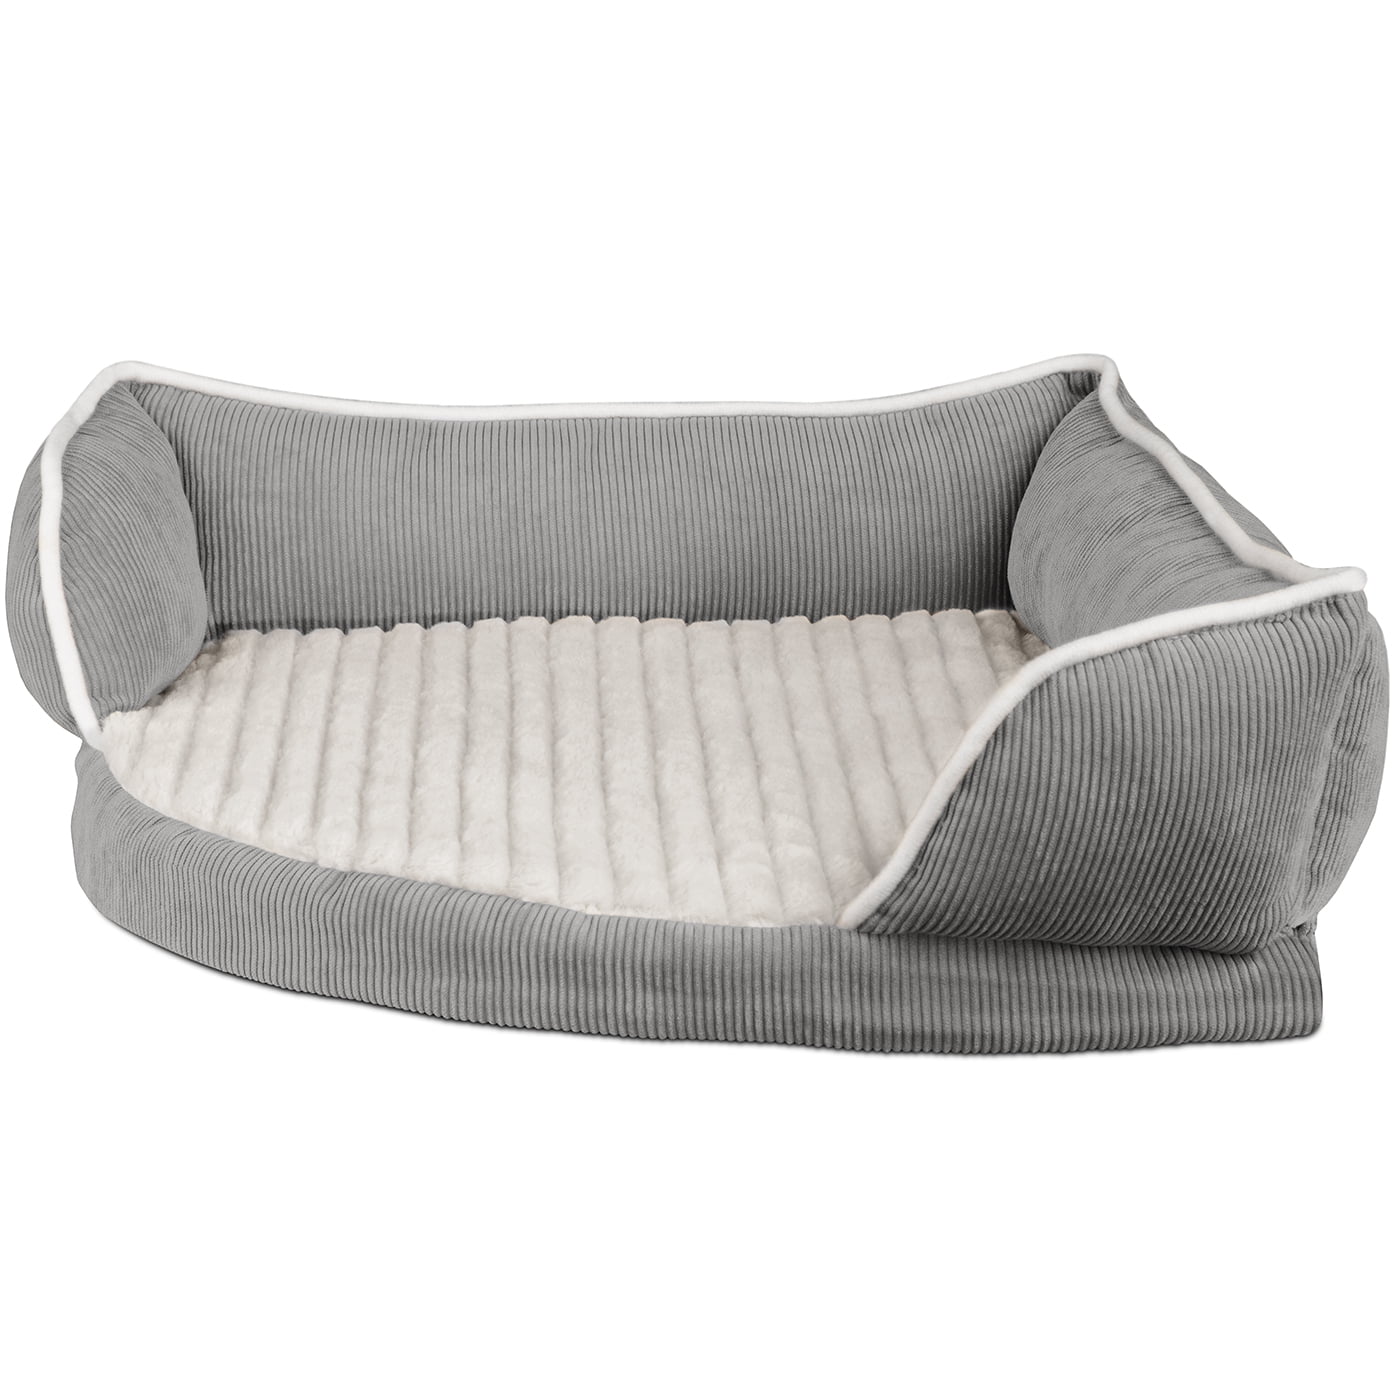 Cat & Kittens Paws & Pals Pet Beds for Dogs and Cats 2019 Newly Designed Indestructible Cuddler Couch Washable Accessories Large Pets Pillow Bed Best for Small XL Medium Puppy XXL & XXXL Dog 